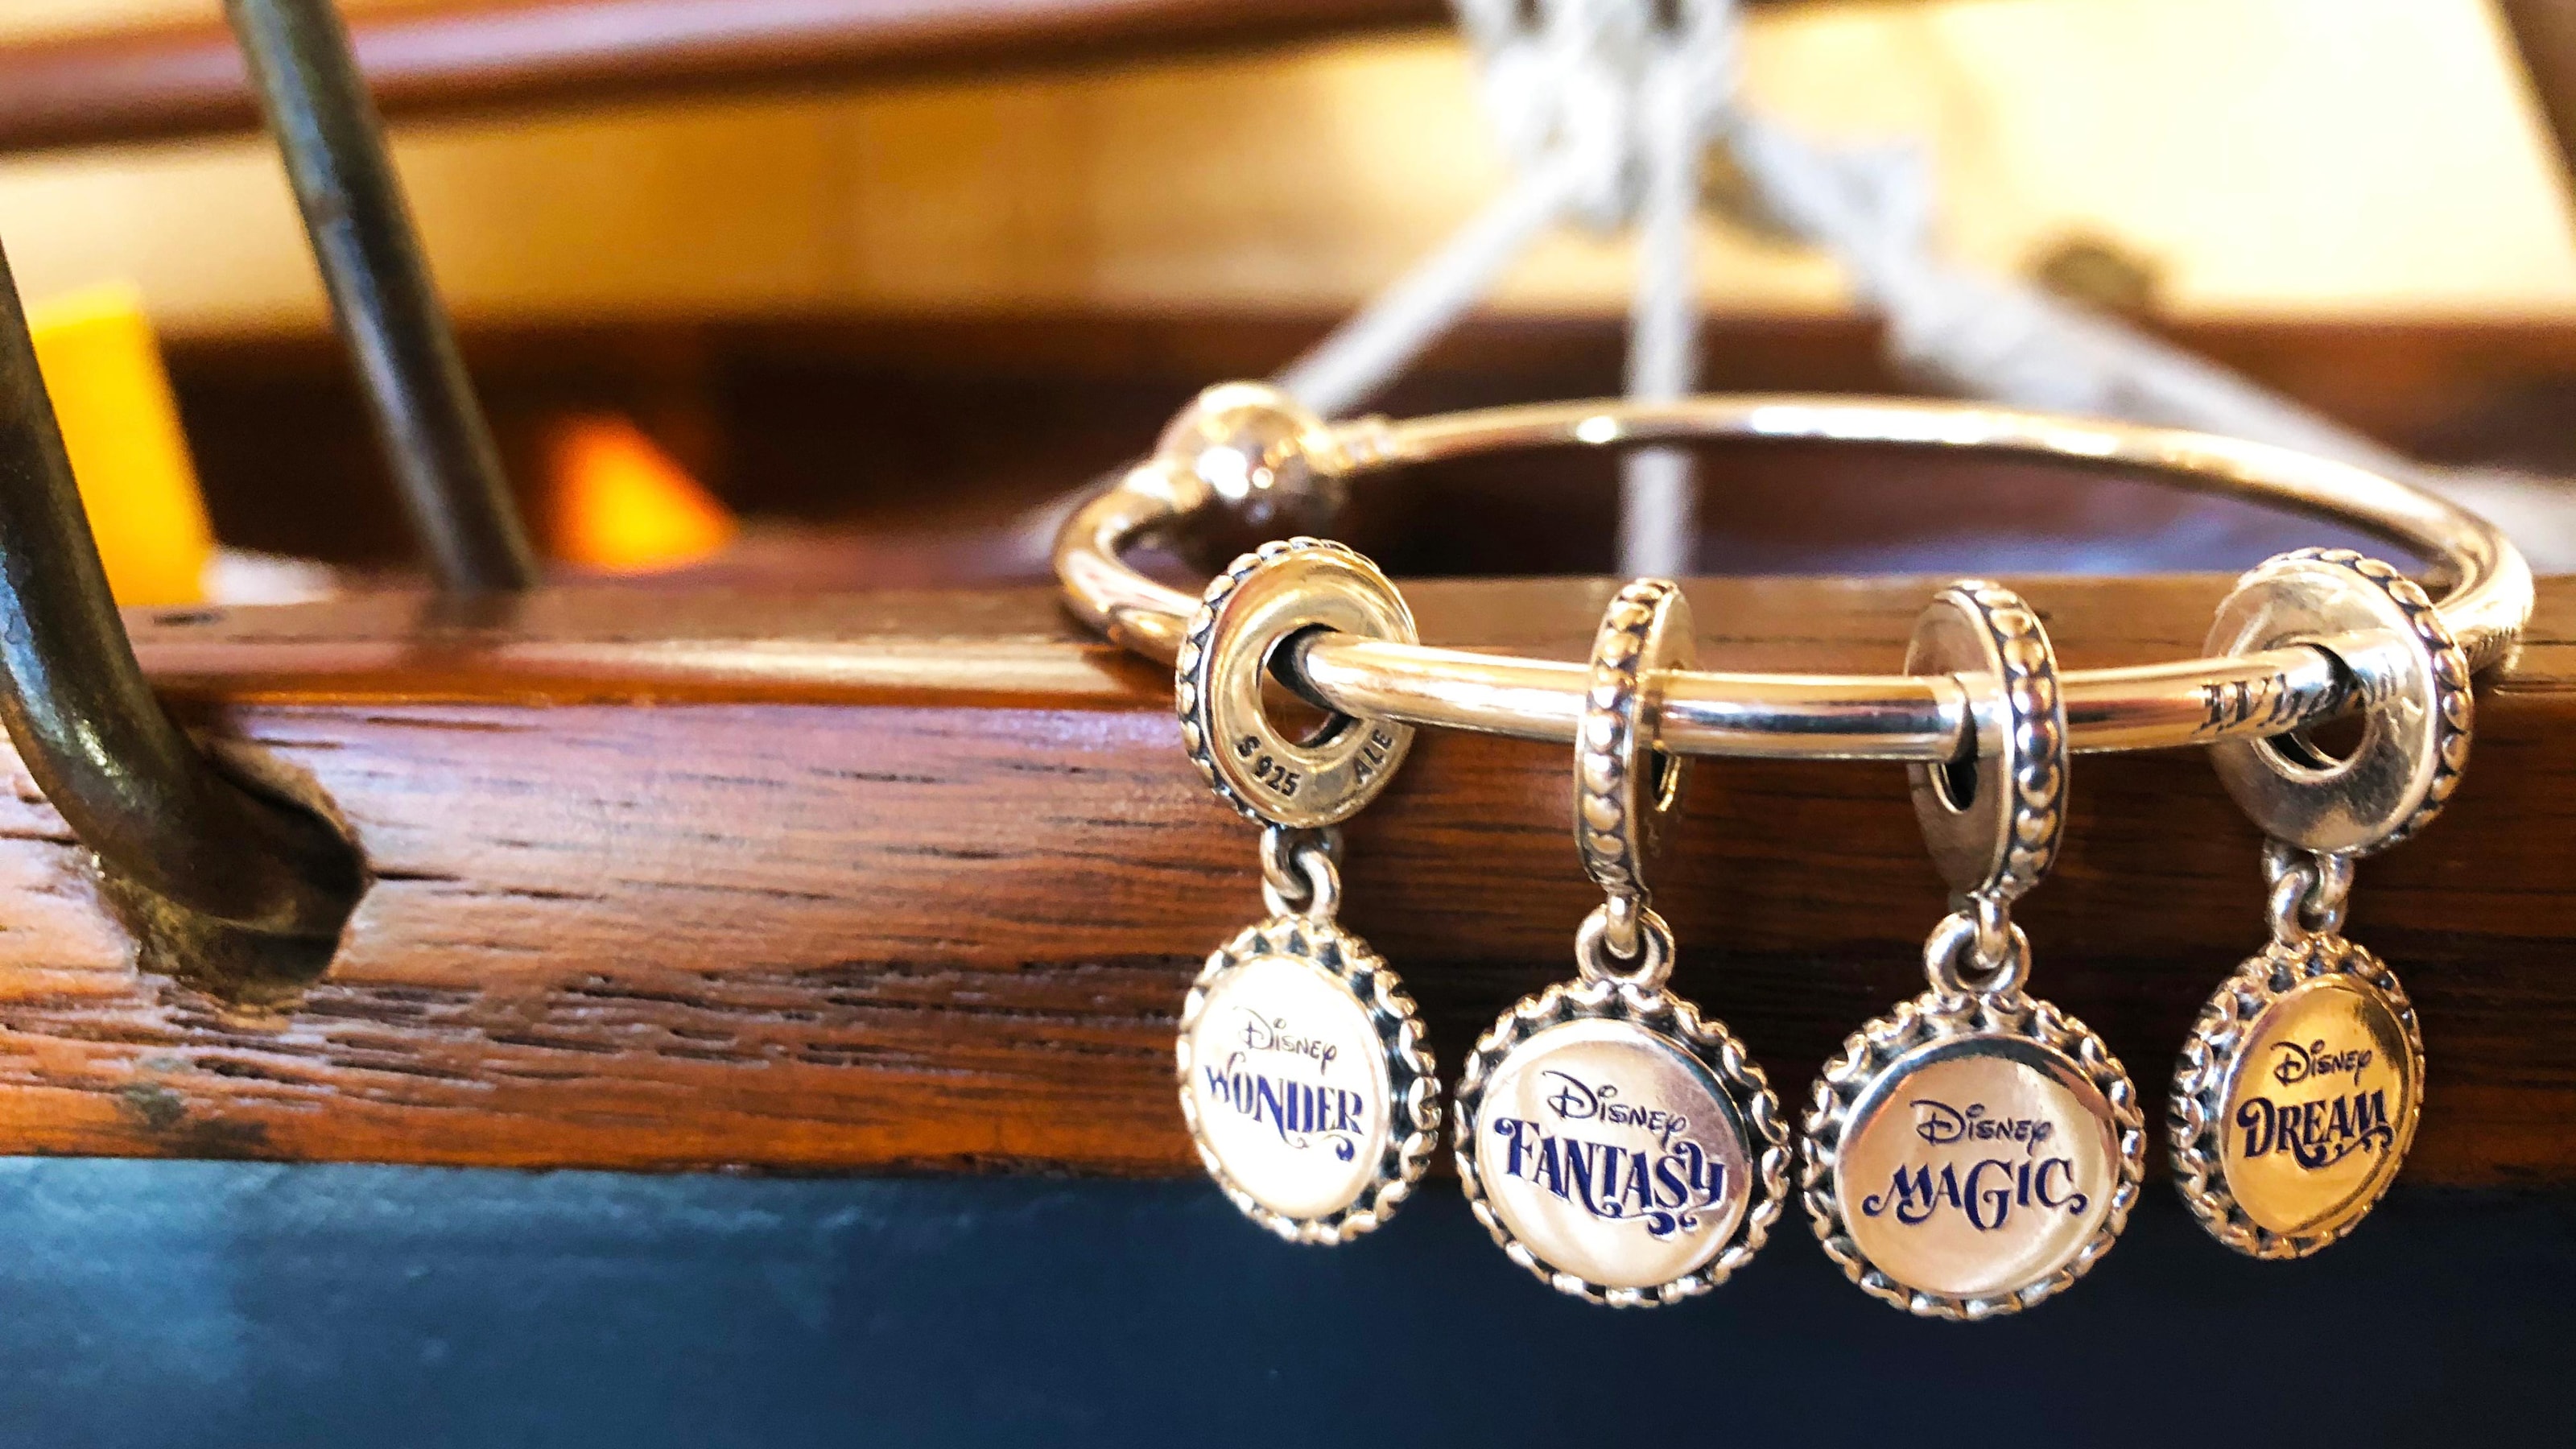 Check Out The New Pandora Charms You Can Only Get on Disney Ships ...